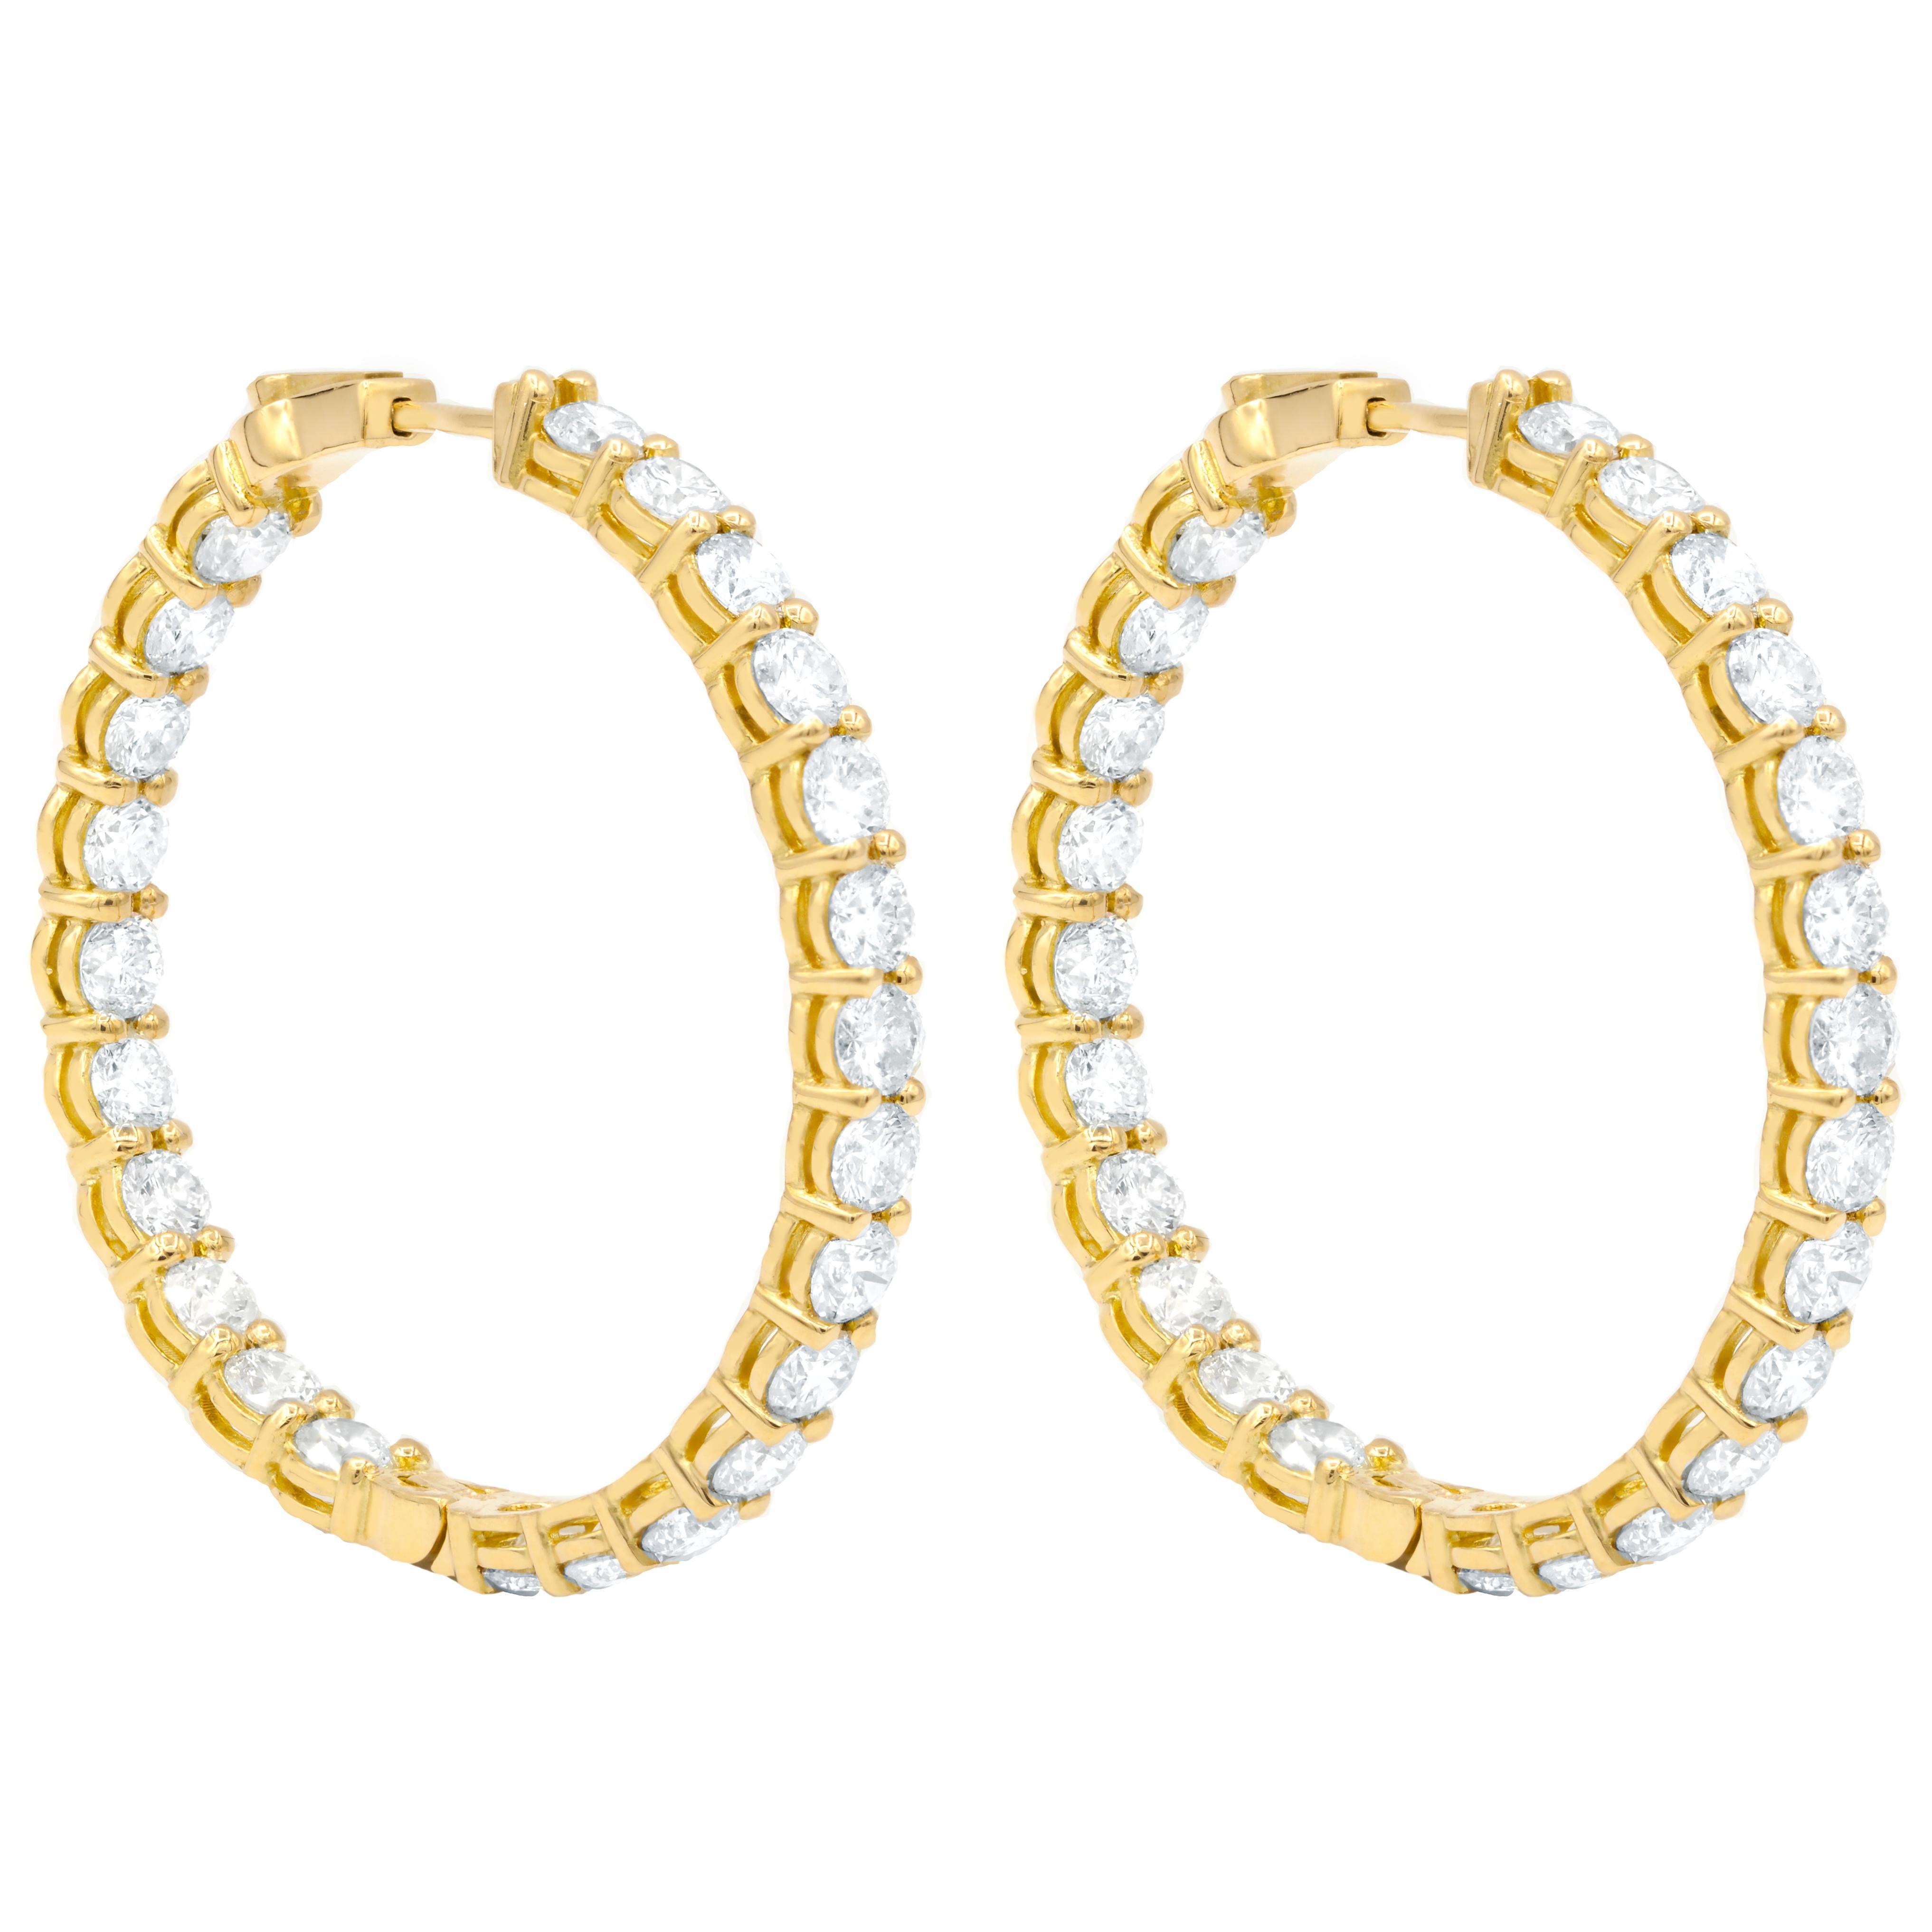 
18K Yellow Gold Diamond Earrings featuring 15.00 Carat T.W. of Natural Diamonds 

• Crafted in Yellow Gold 
• 15.00 Carat White Diamonds
• 100% Natural Diamonds 
• Earrings
• High polish finish

Underline your look with this sharp 18K Yellow Gold